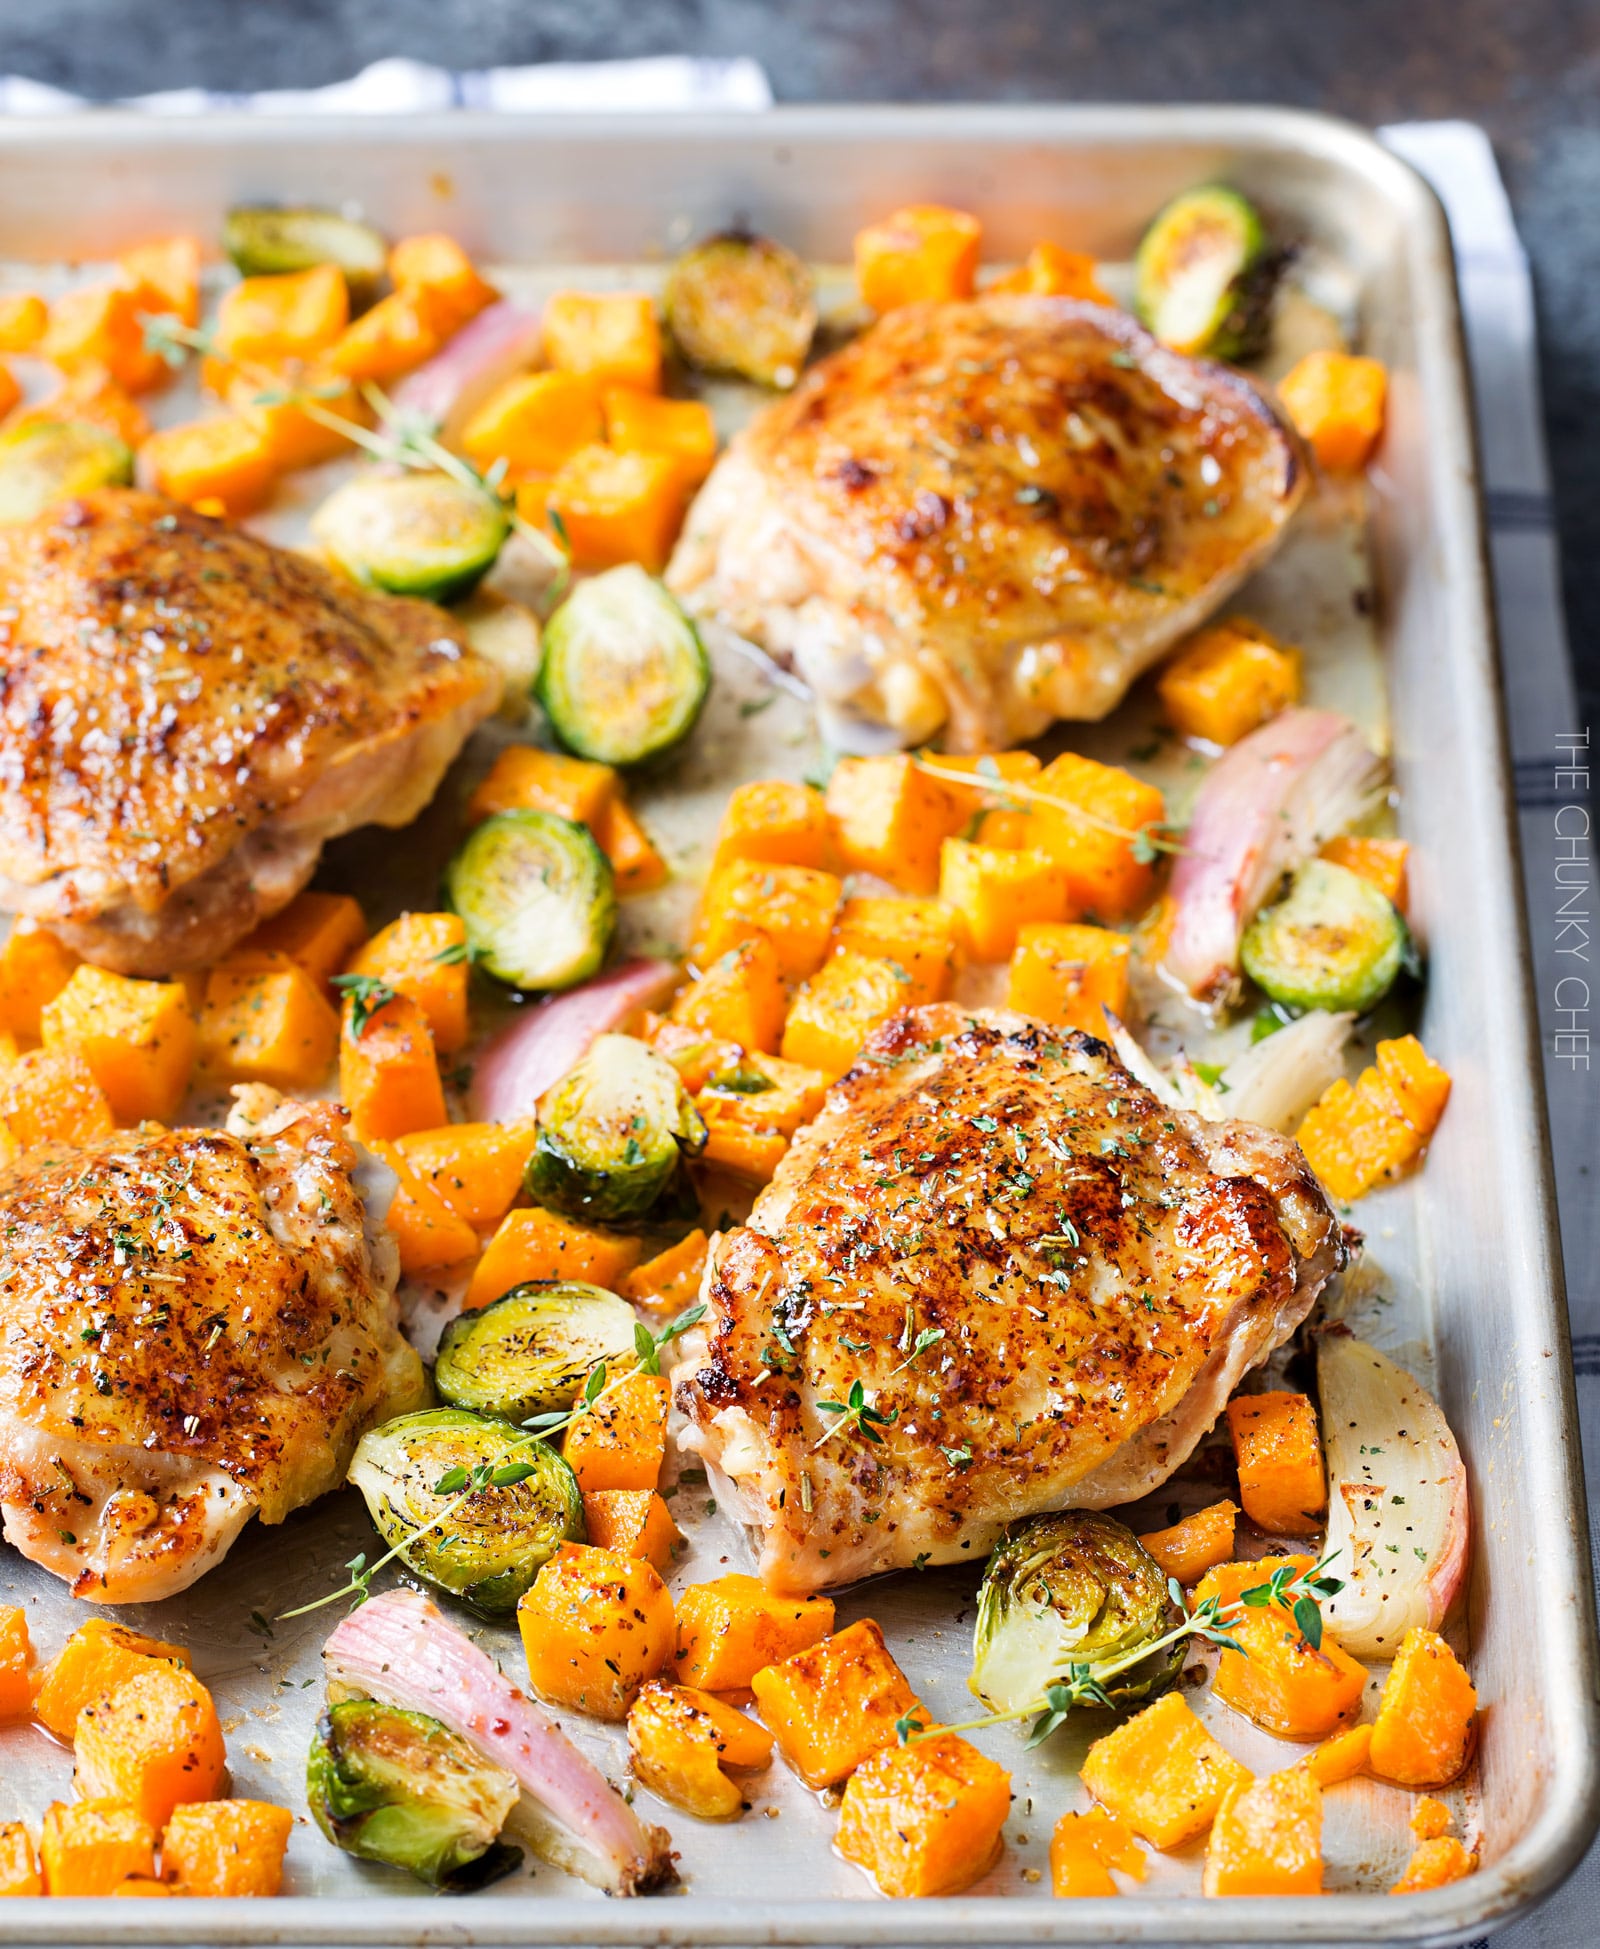 Sheet Pan Maple Mustard Roasted Chicken | Chicken thighs are coated in a sweet and savory maple mustard sauce and roasted alongside creamy butternut squash and savory brussels sprouts, all on one sheet pan for an incredibly quick, easy meal with hardly any cleanup needed! | http://thechunkychef.com